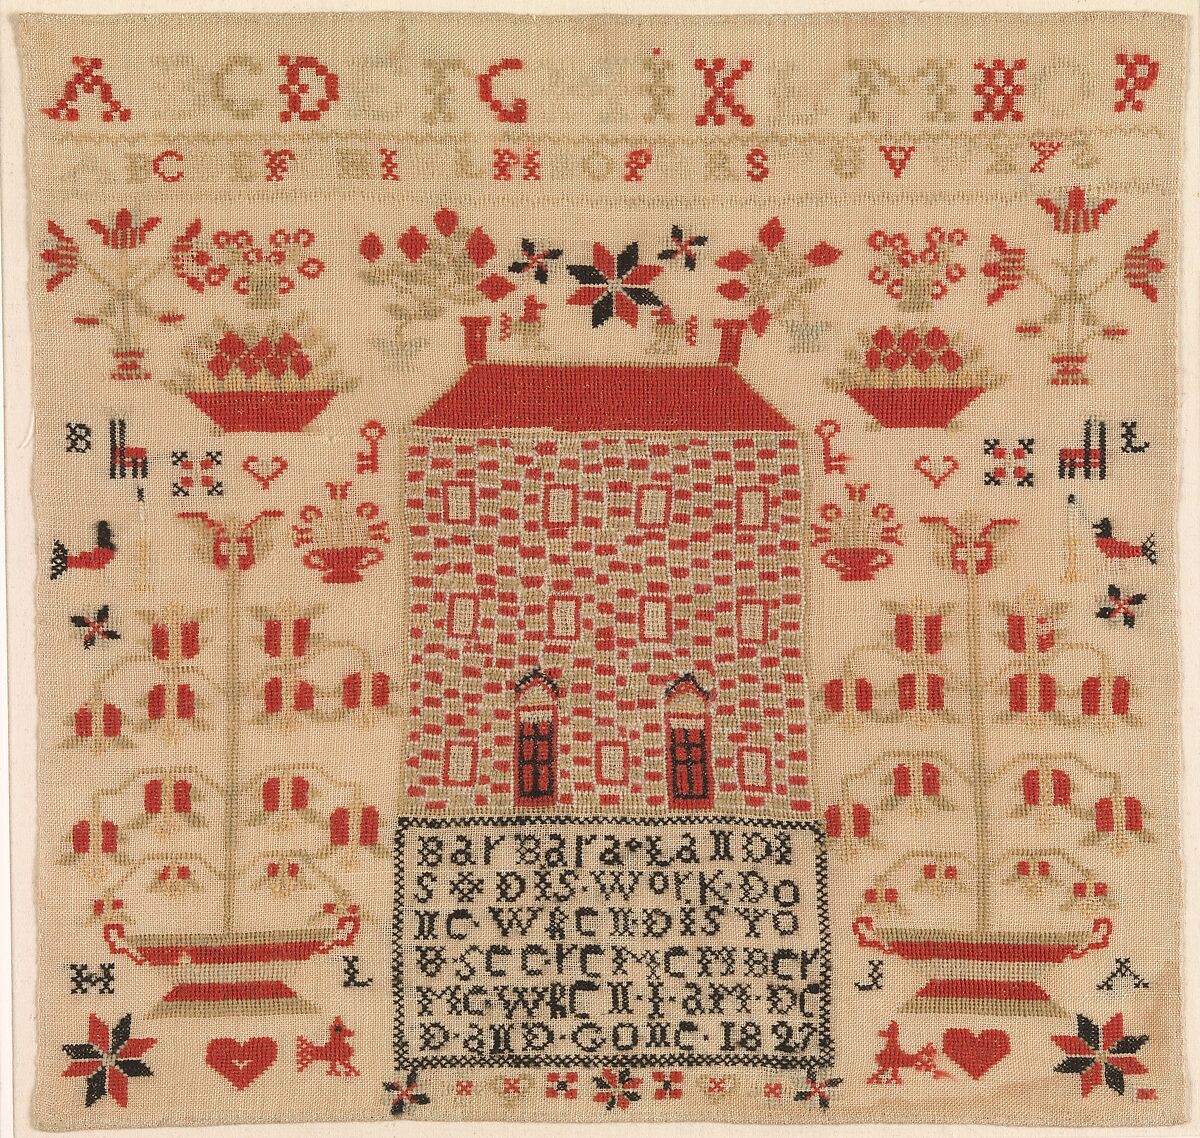 Embroidered Sampler, Barbara Landis (1816–1884), Wool on linen, embroidered, American 